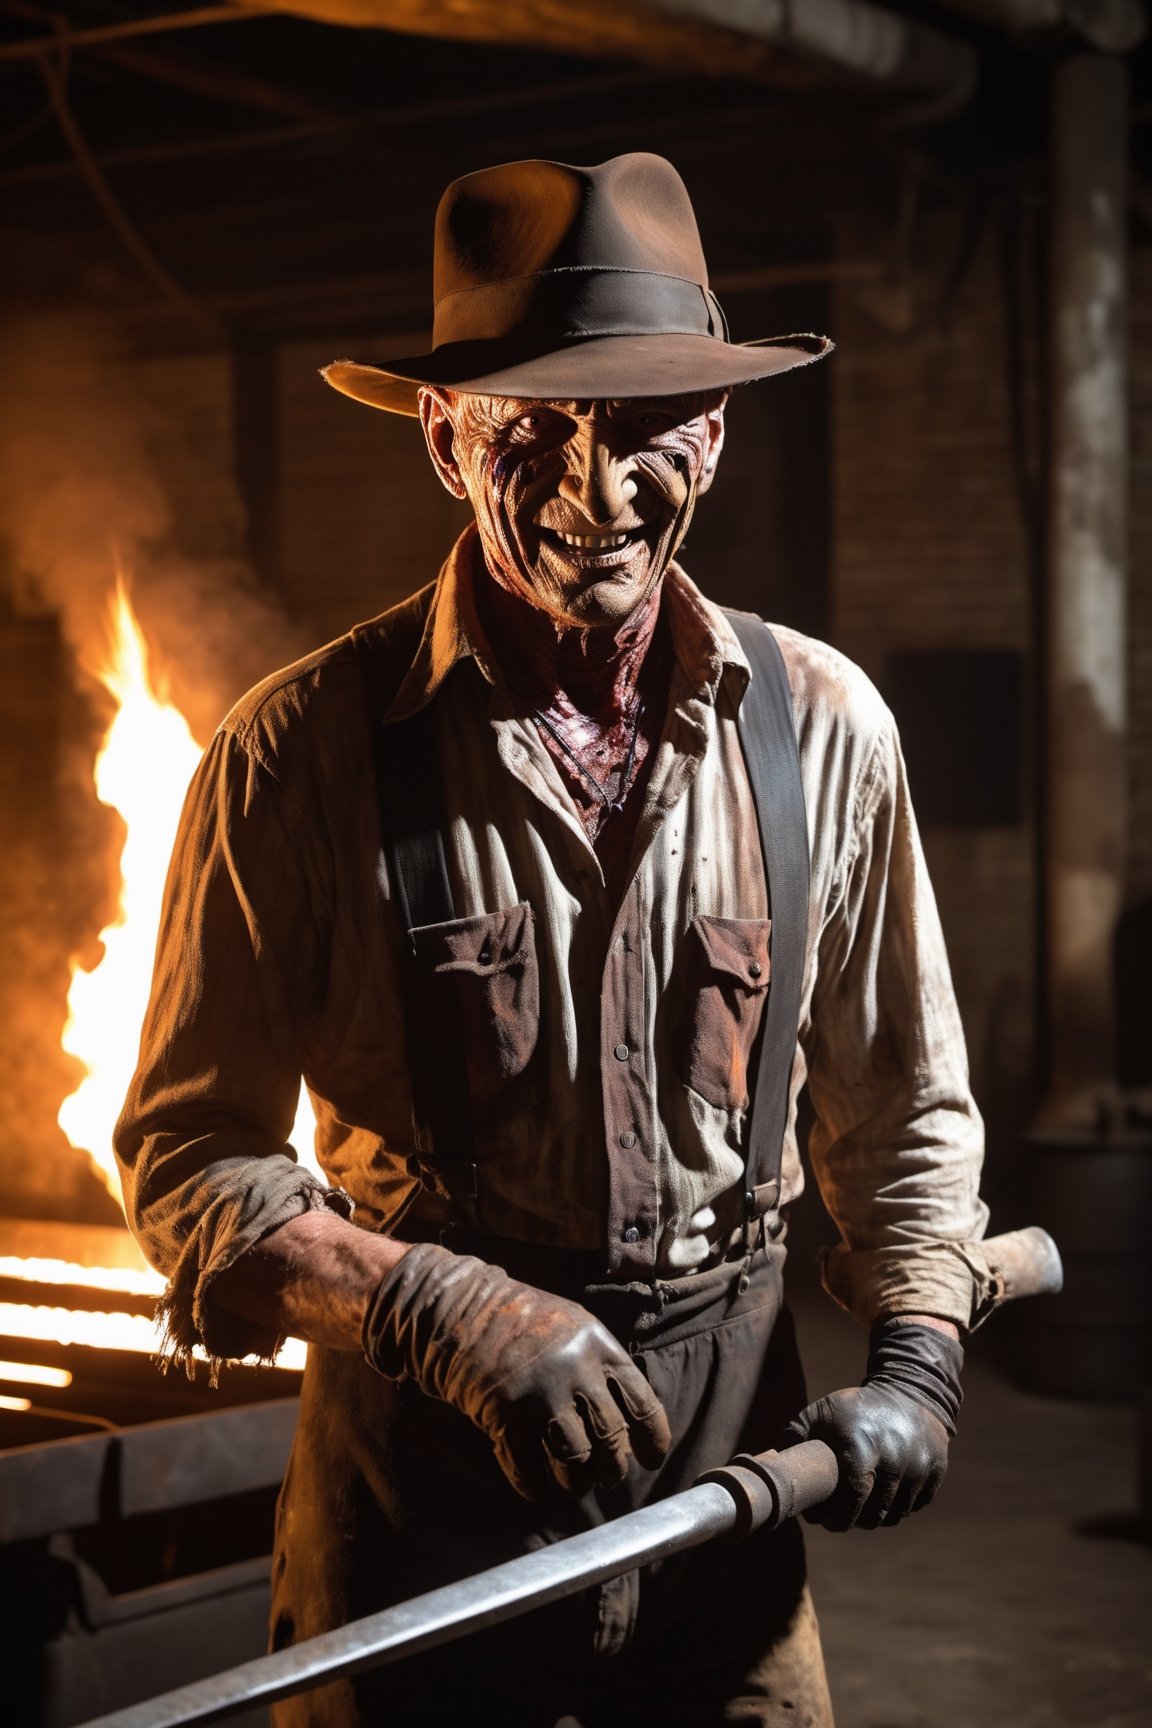 Freddy Krueger, fedora hat, facial portrait, evil smile, ragged shirt, wearing glove with long blades on each finger, on right hand, inside old warehouse, dim light, big rusty iron oven, faucets leaking, fire, 